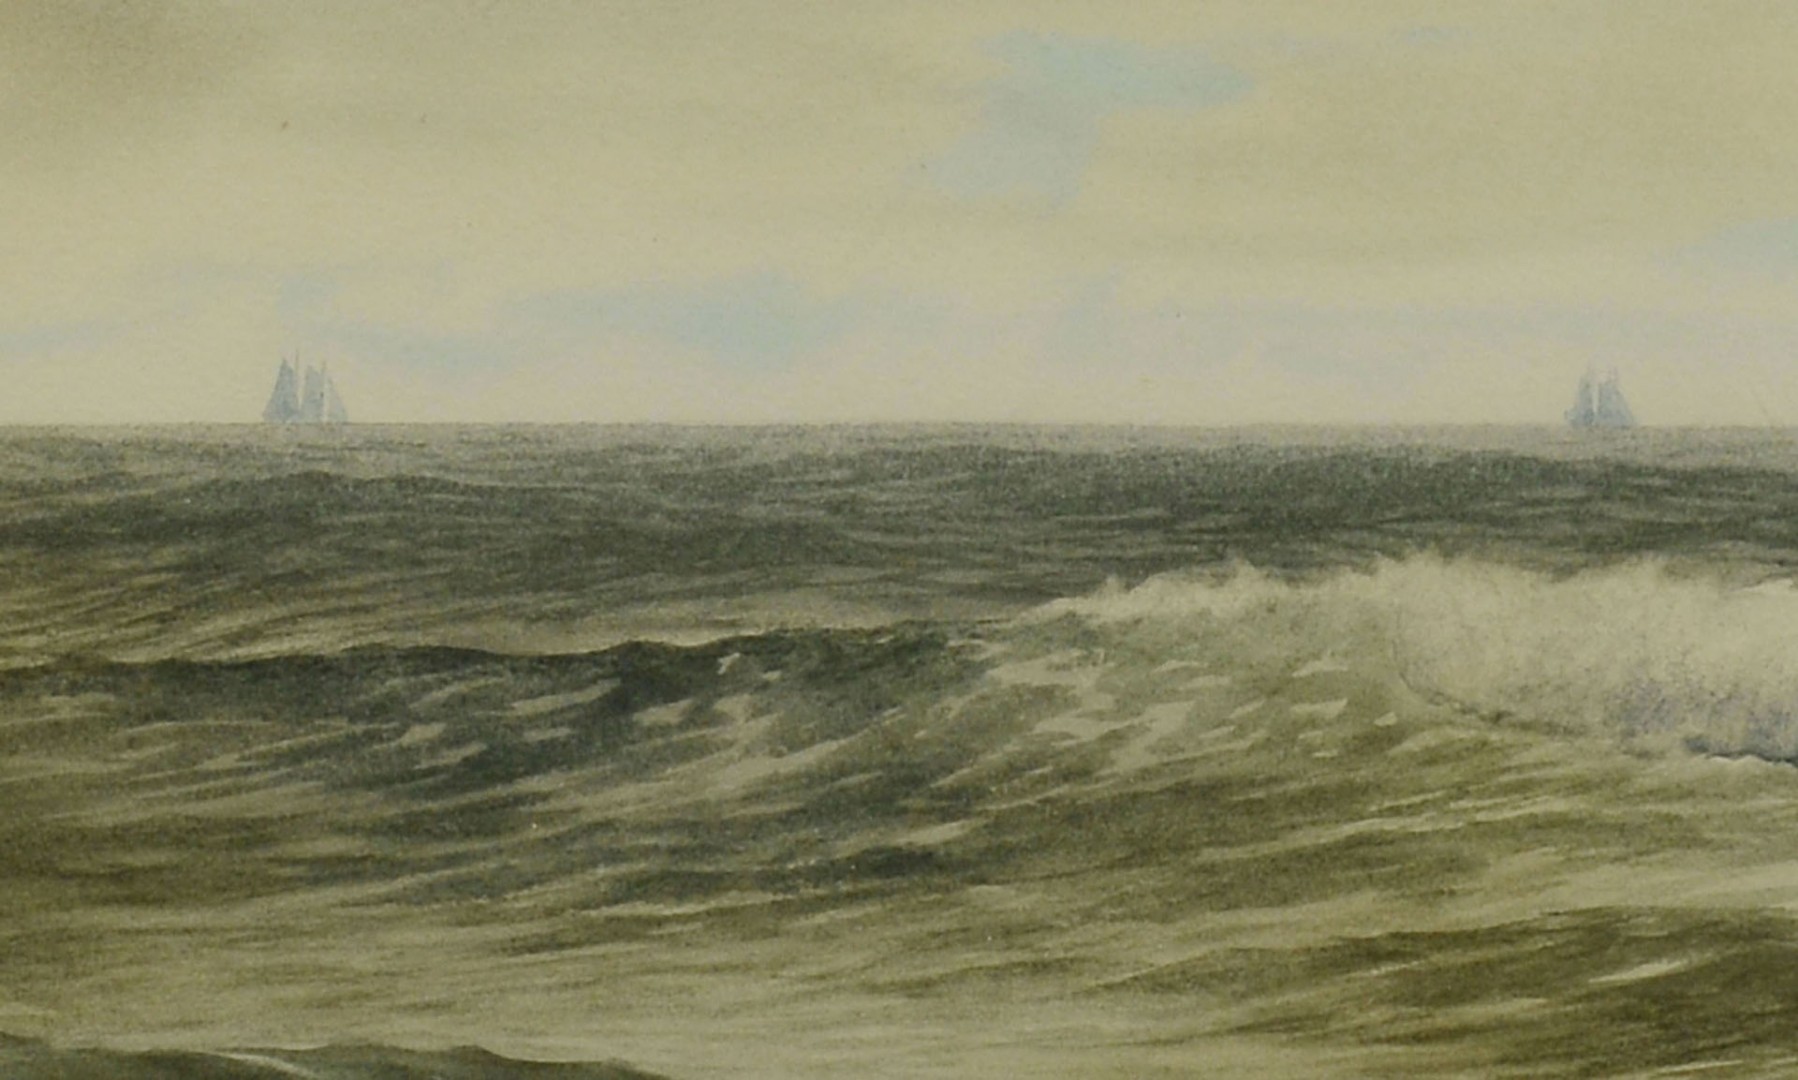 Lot 197: George Howell Gay watercolor seascape